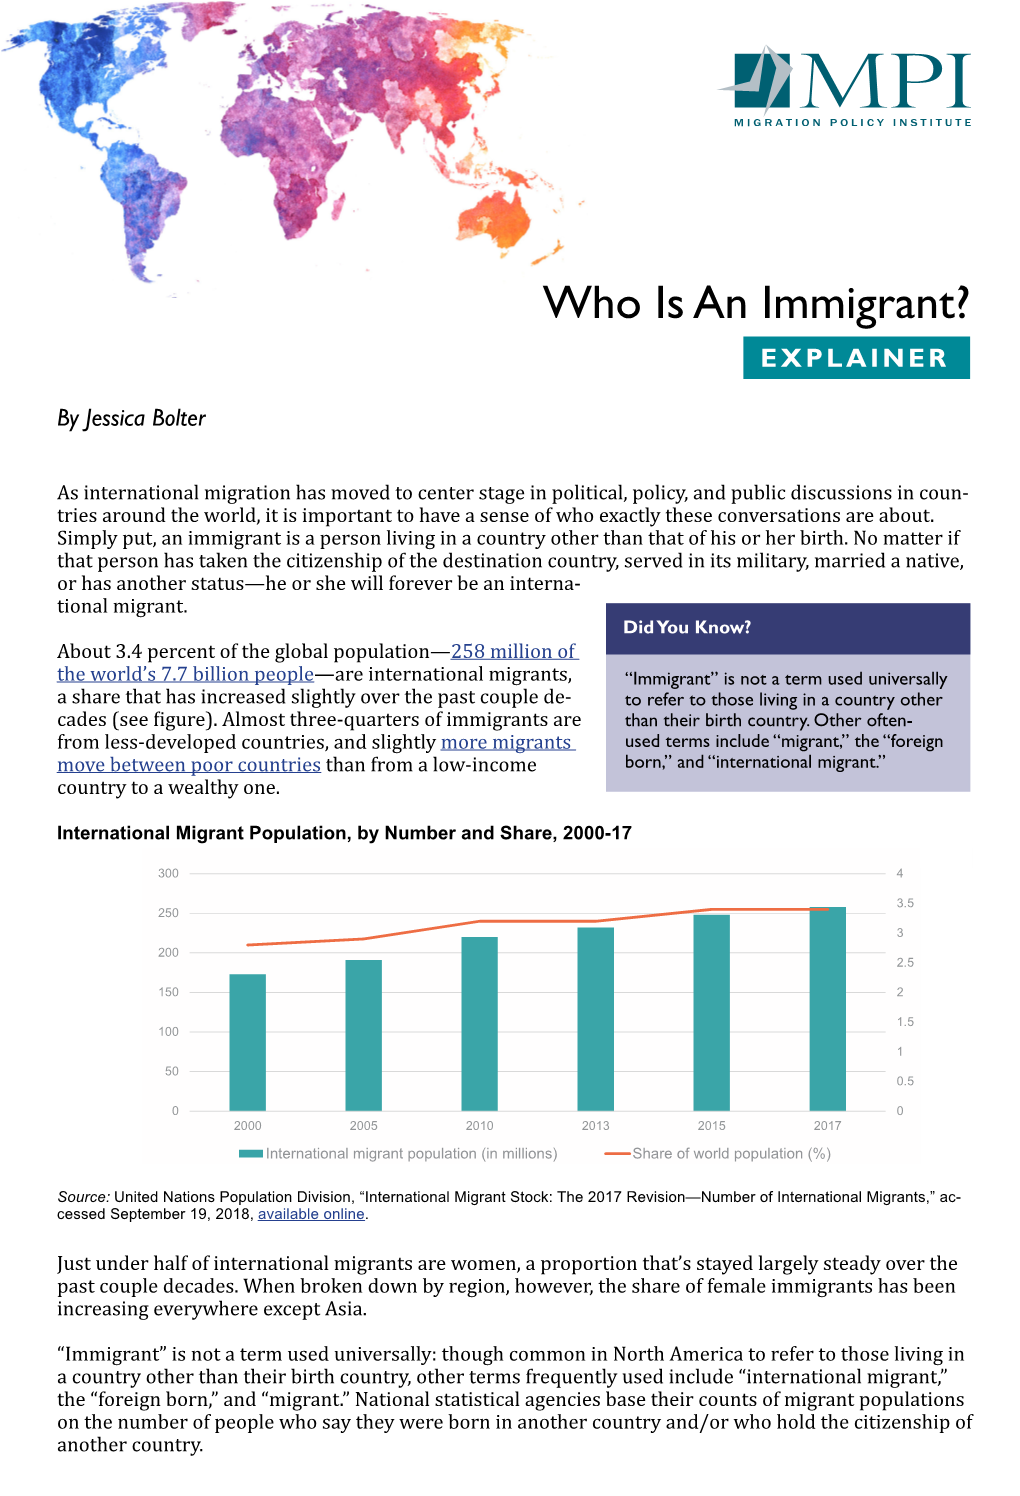 Explainer: Who Is an Immigrant?" Migration Policy Institute, February 2019